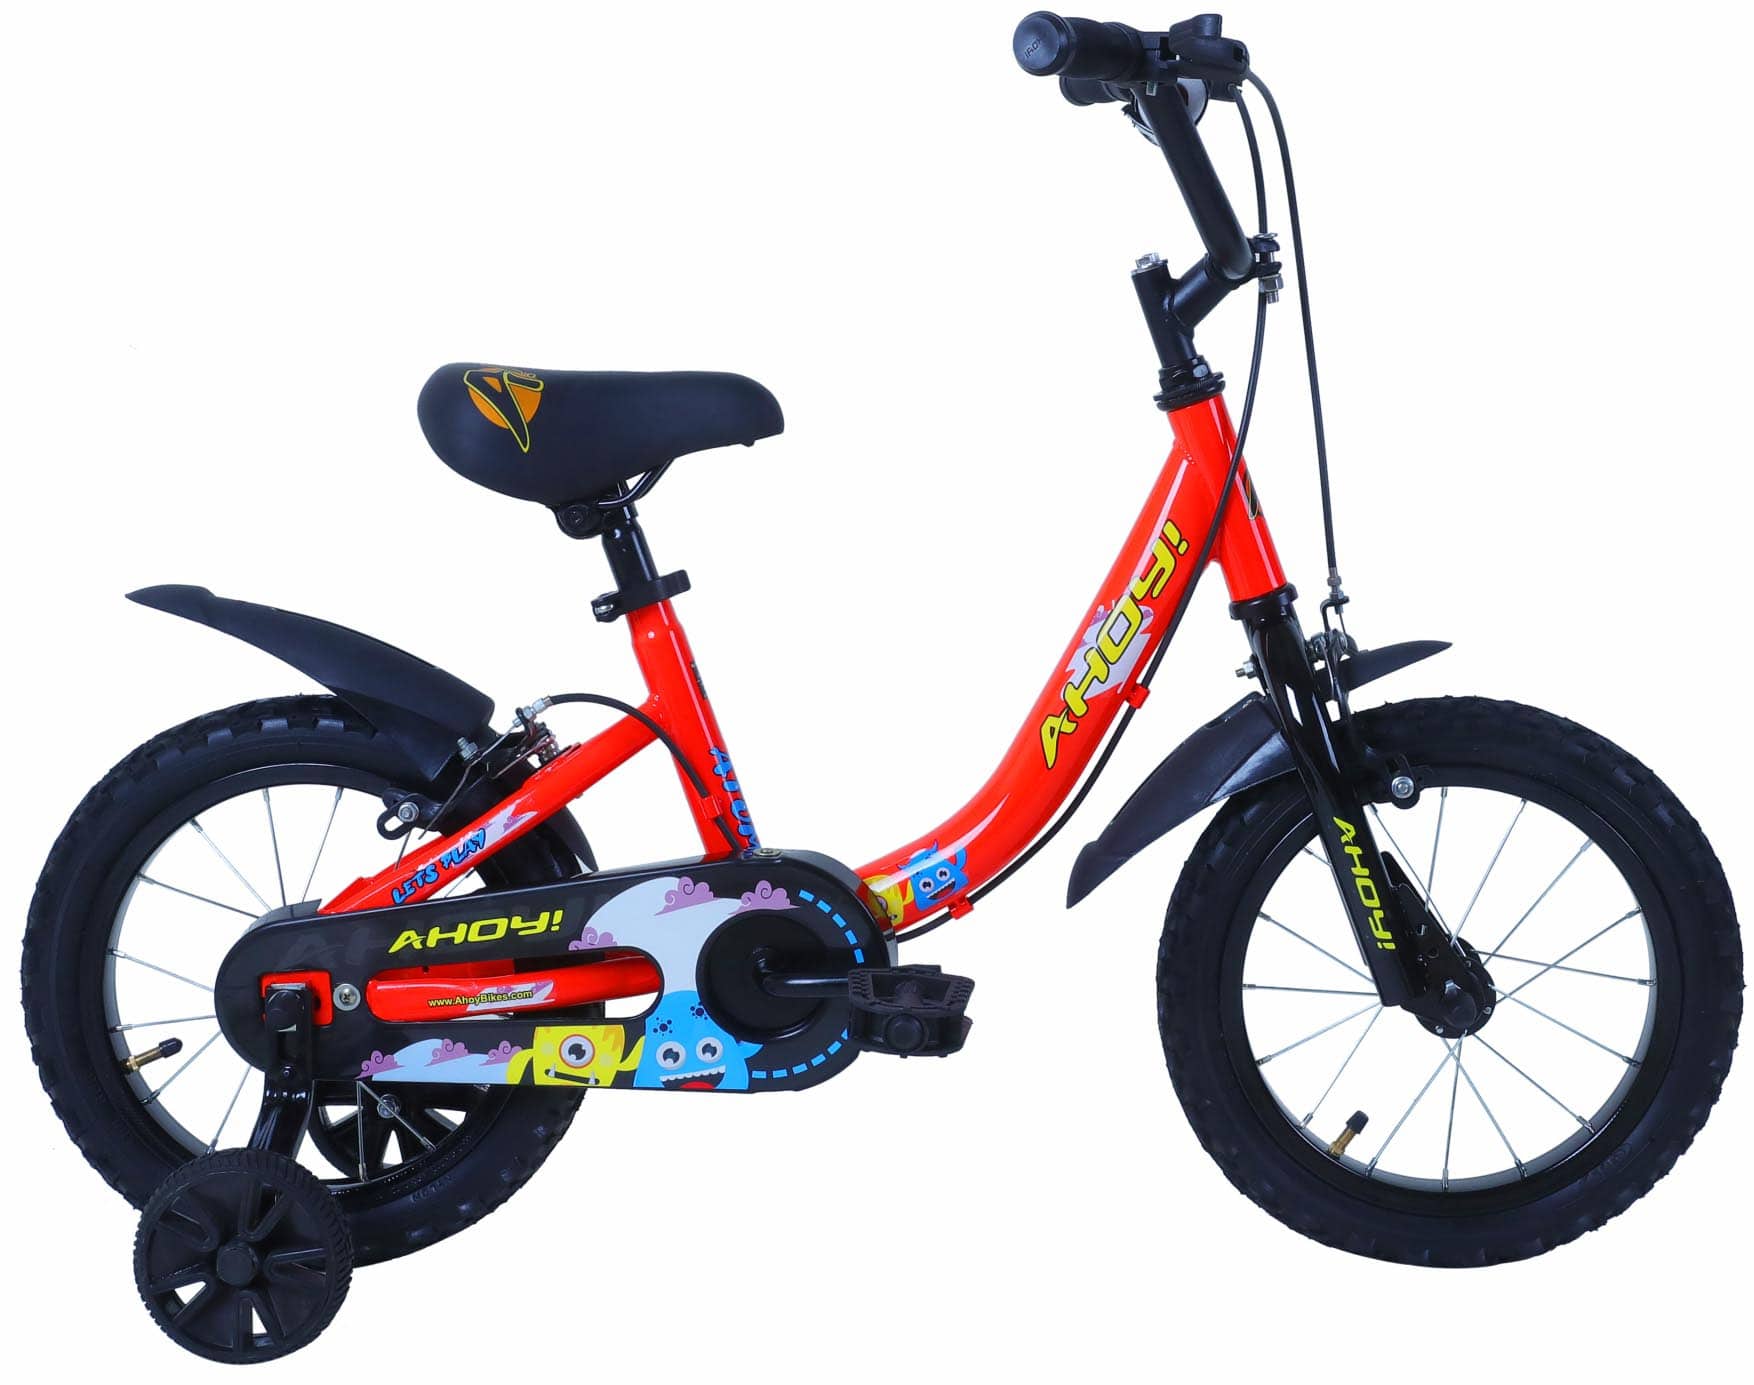 Atom Girls Bike Single Speed 14T | Buy red cycle non gear for kids